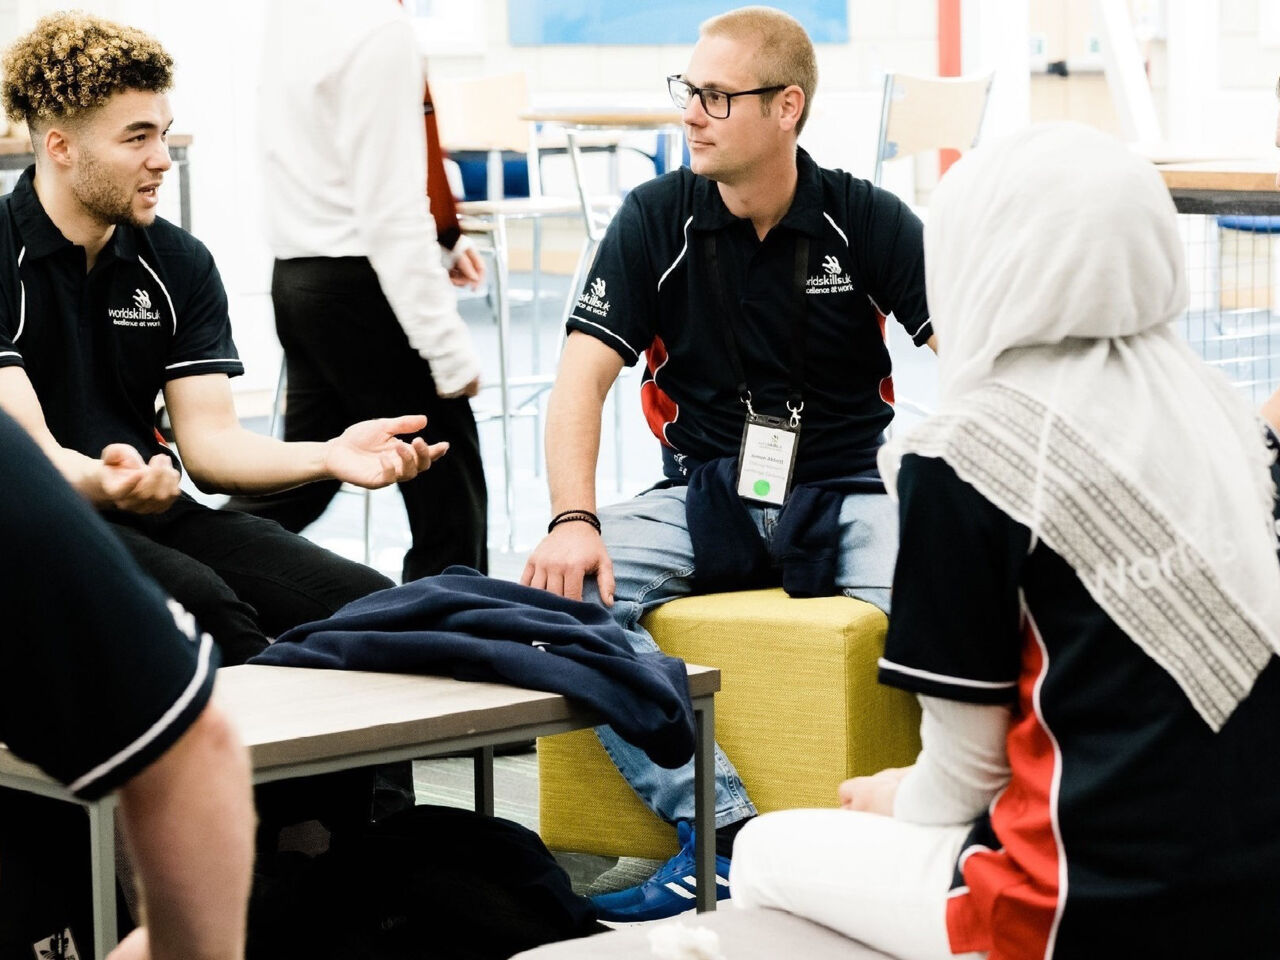 Excellence in students needs excellent teaching, finds report from WorldSkills UK